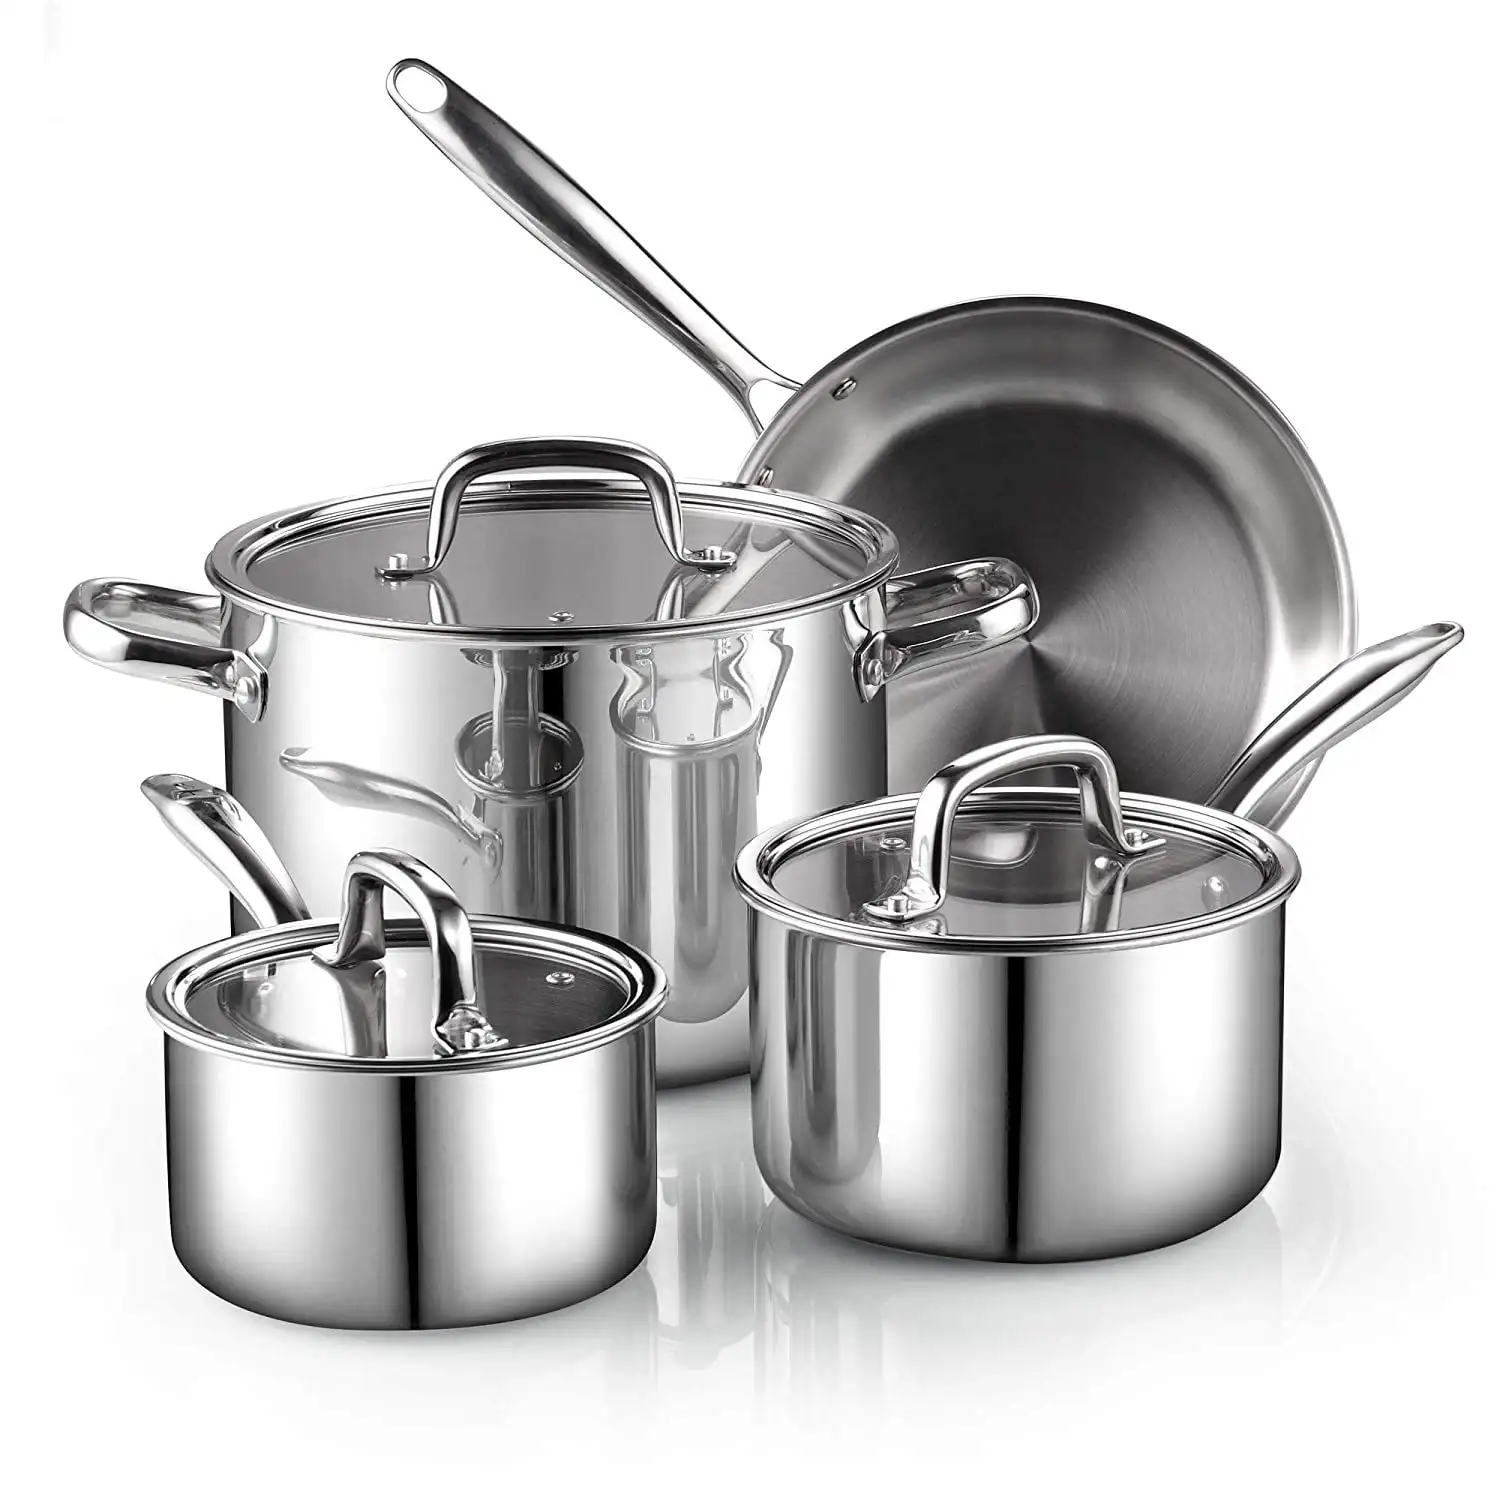 02644 7 Piece Tri-ply Clad Stainless Steel Cookware Set